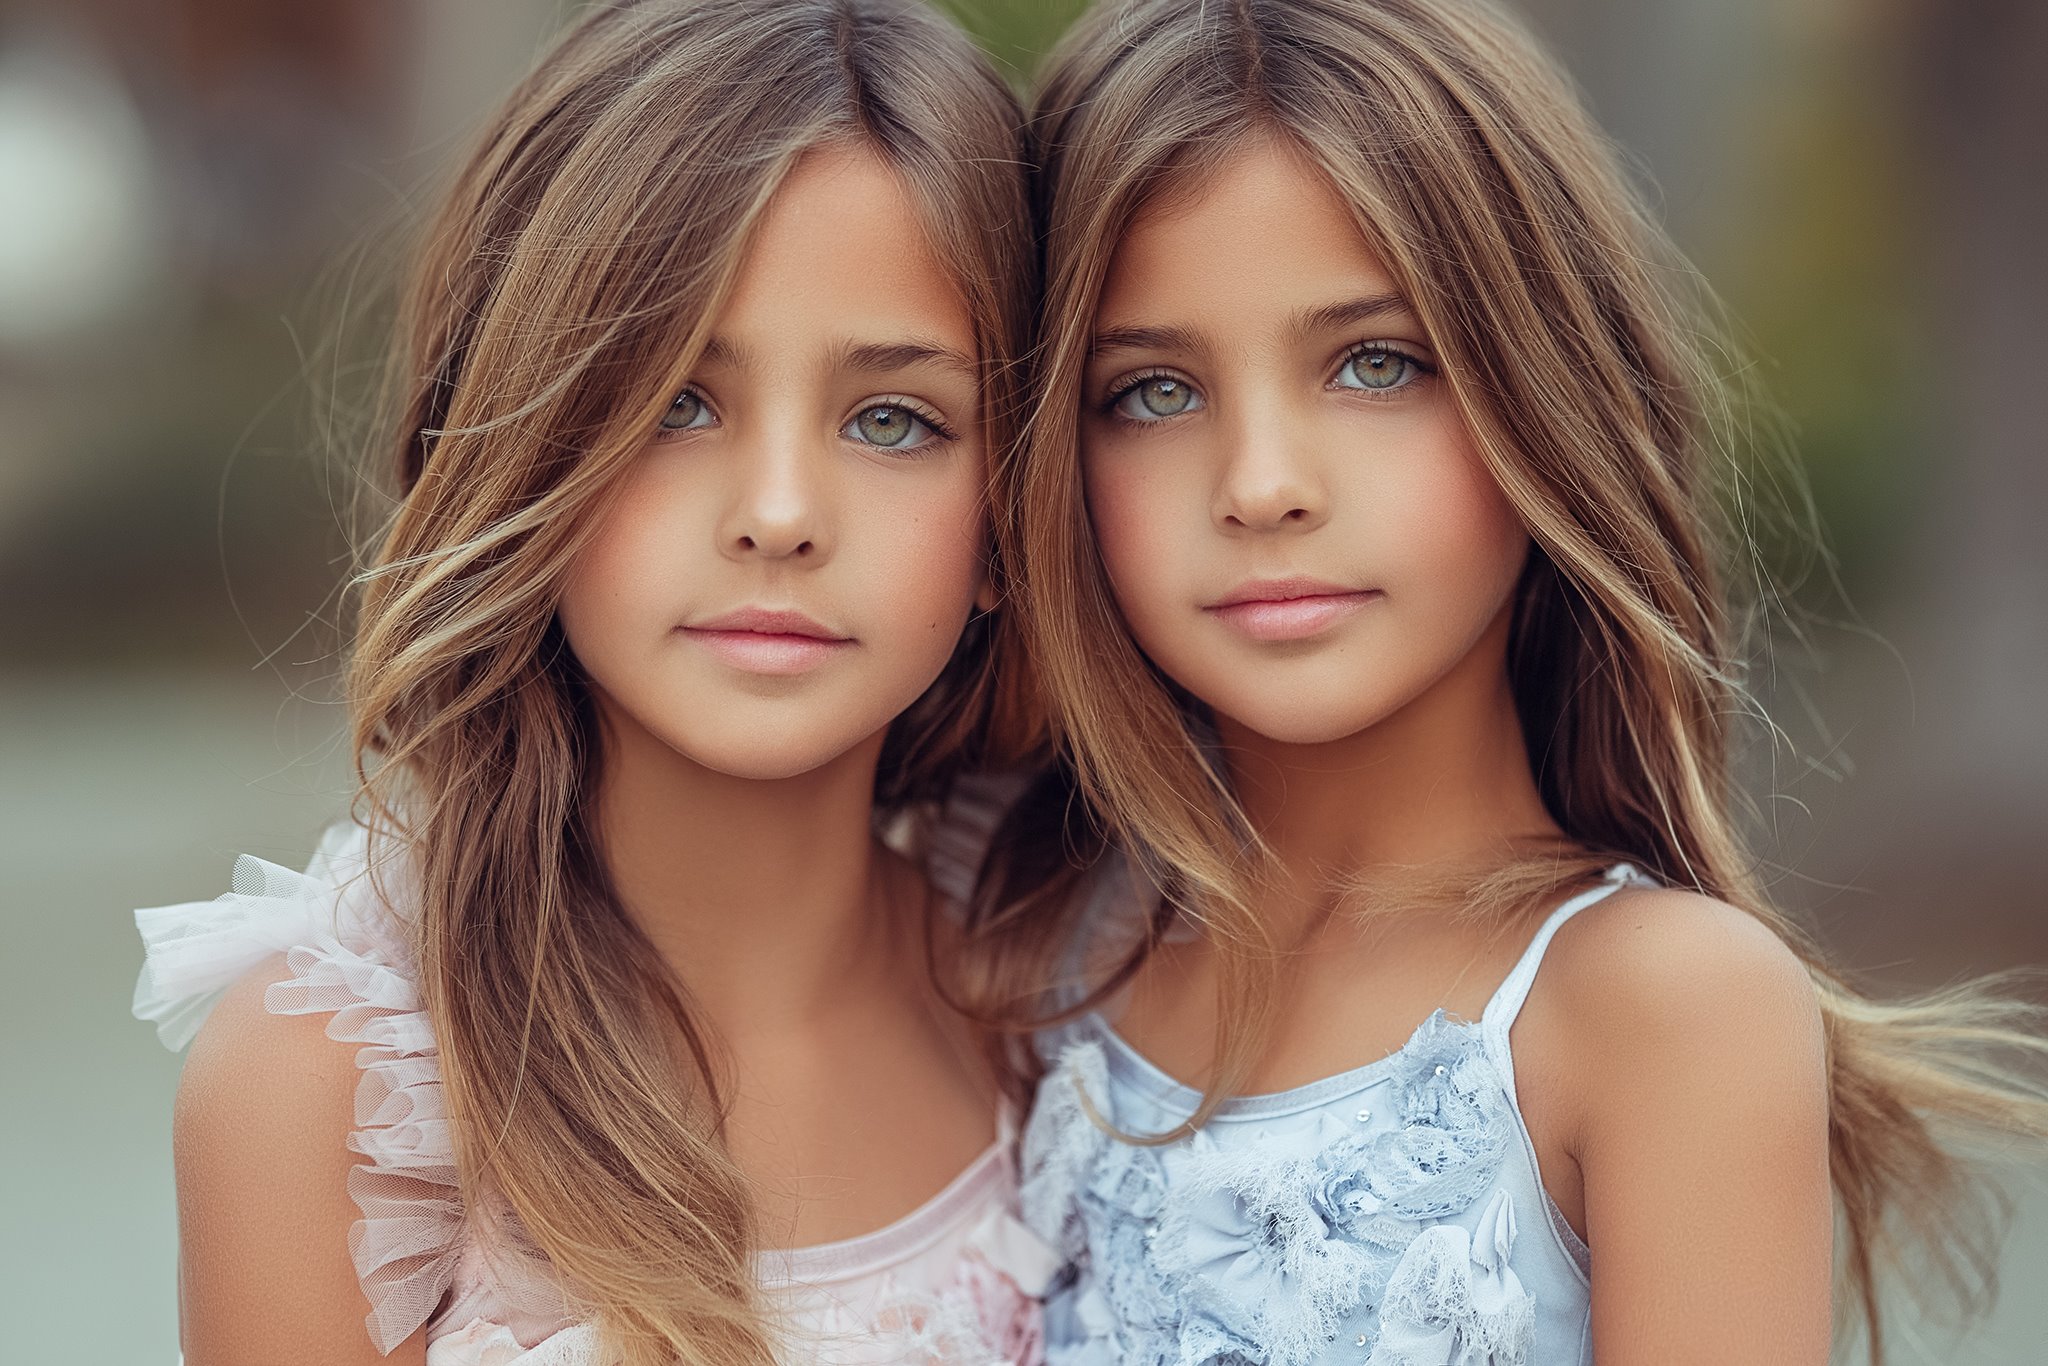 Once They Were Called The World's Most Beautiful Twins – Now Look At Them